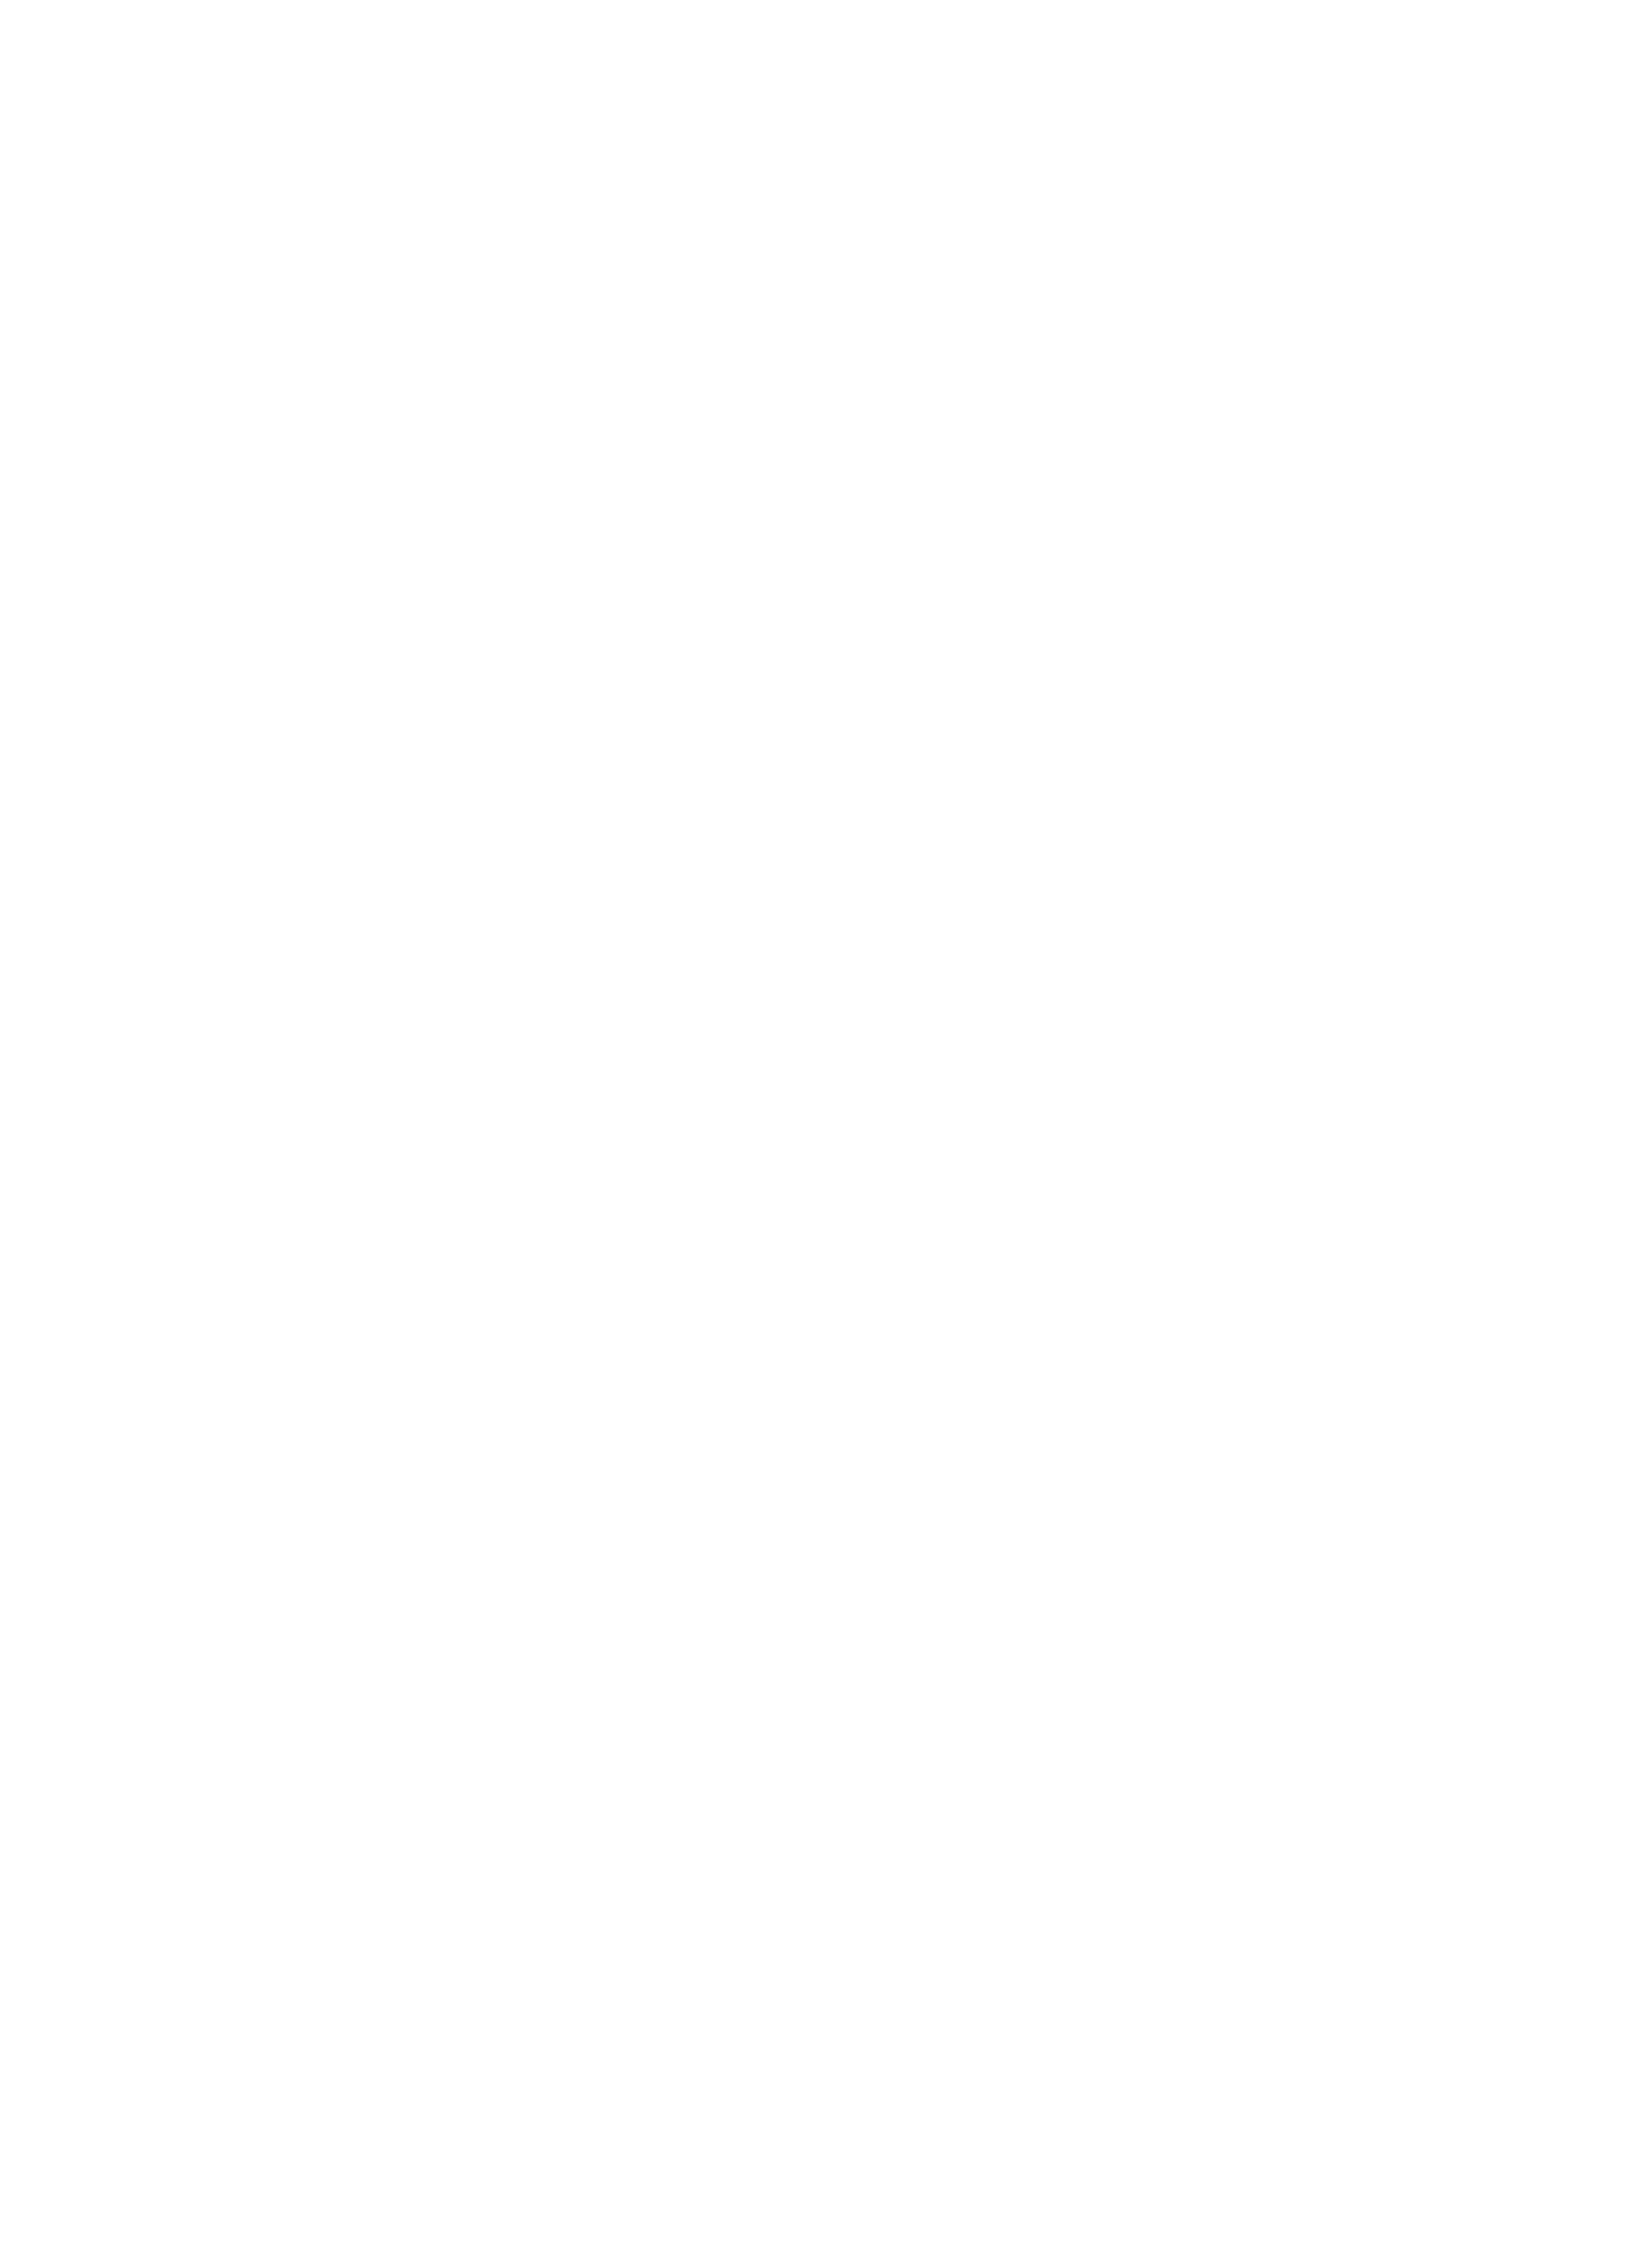 Secluded Hotel Collection